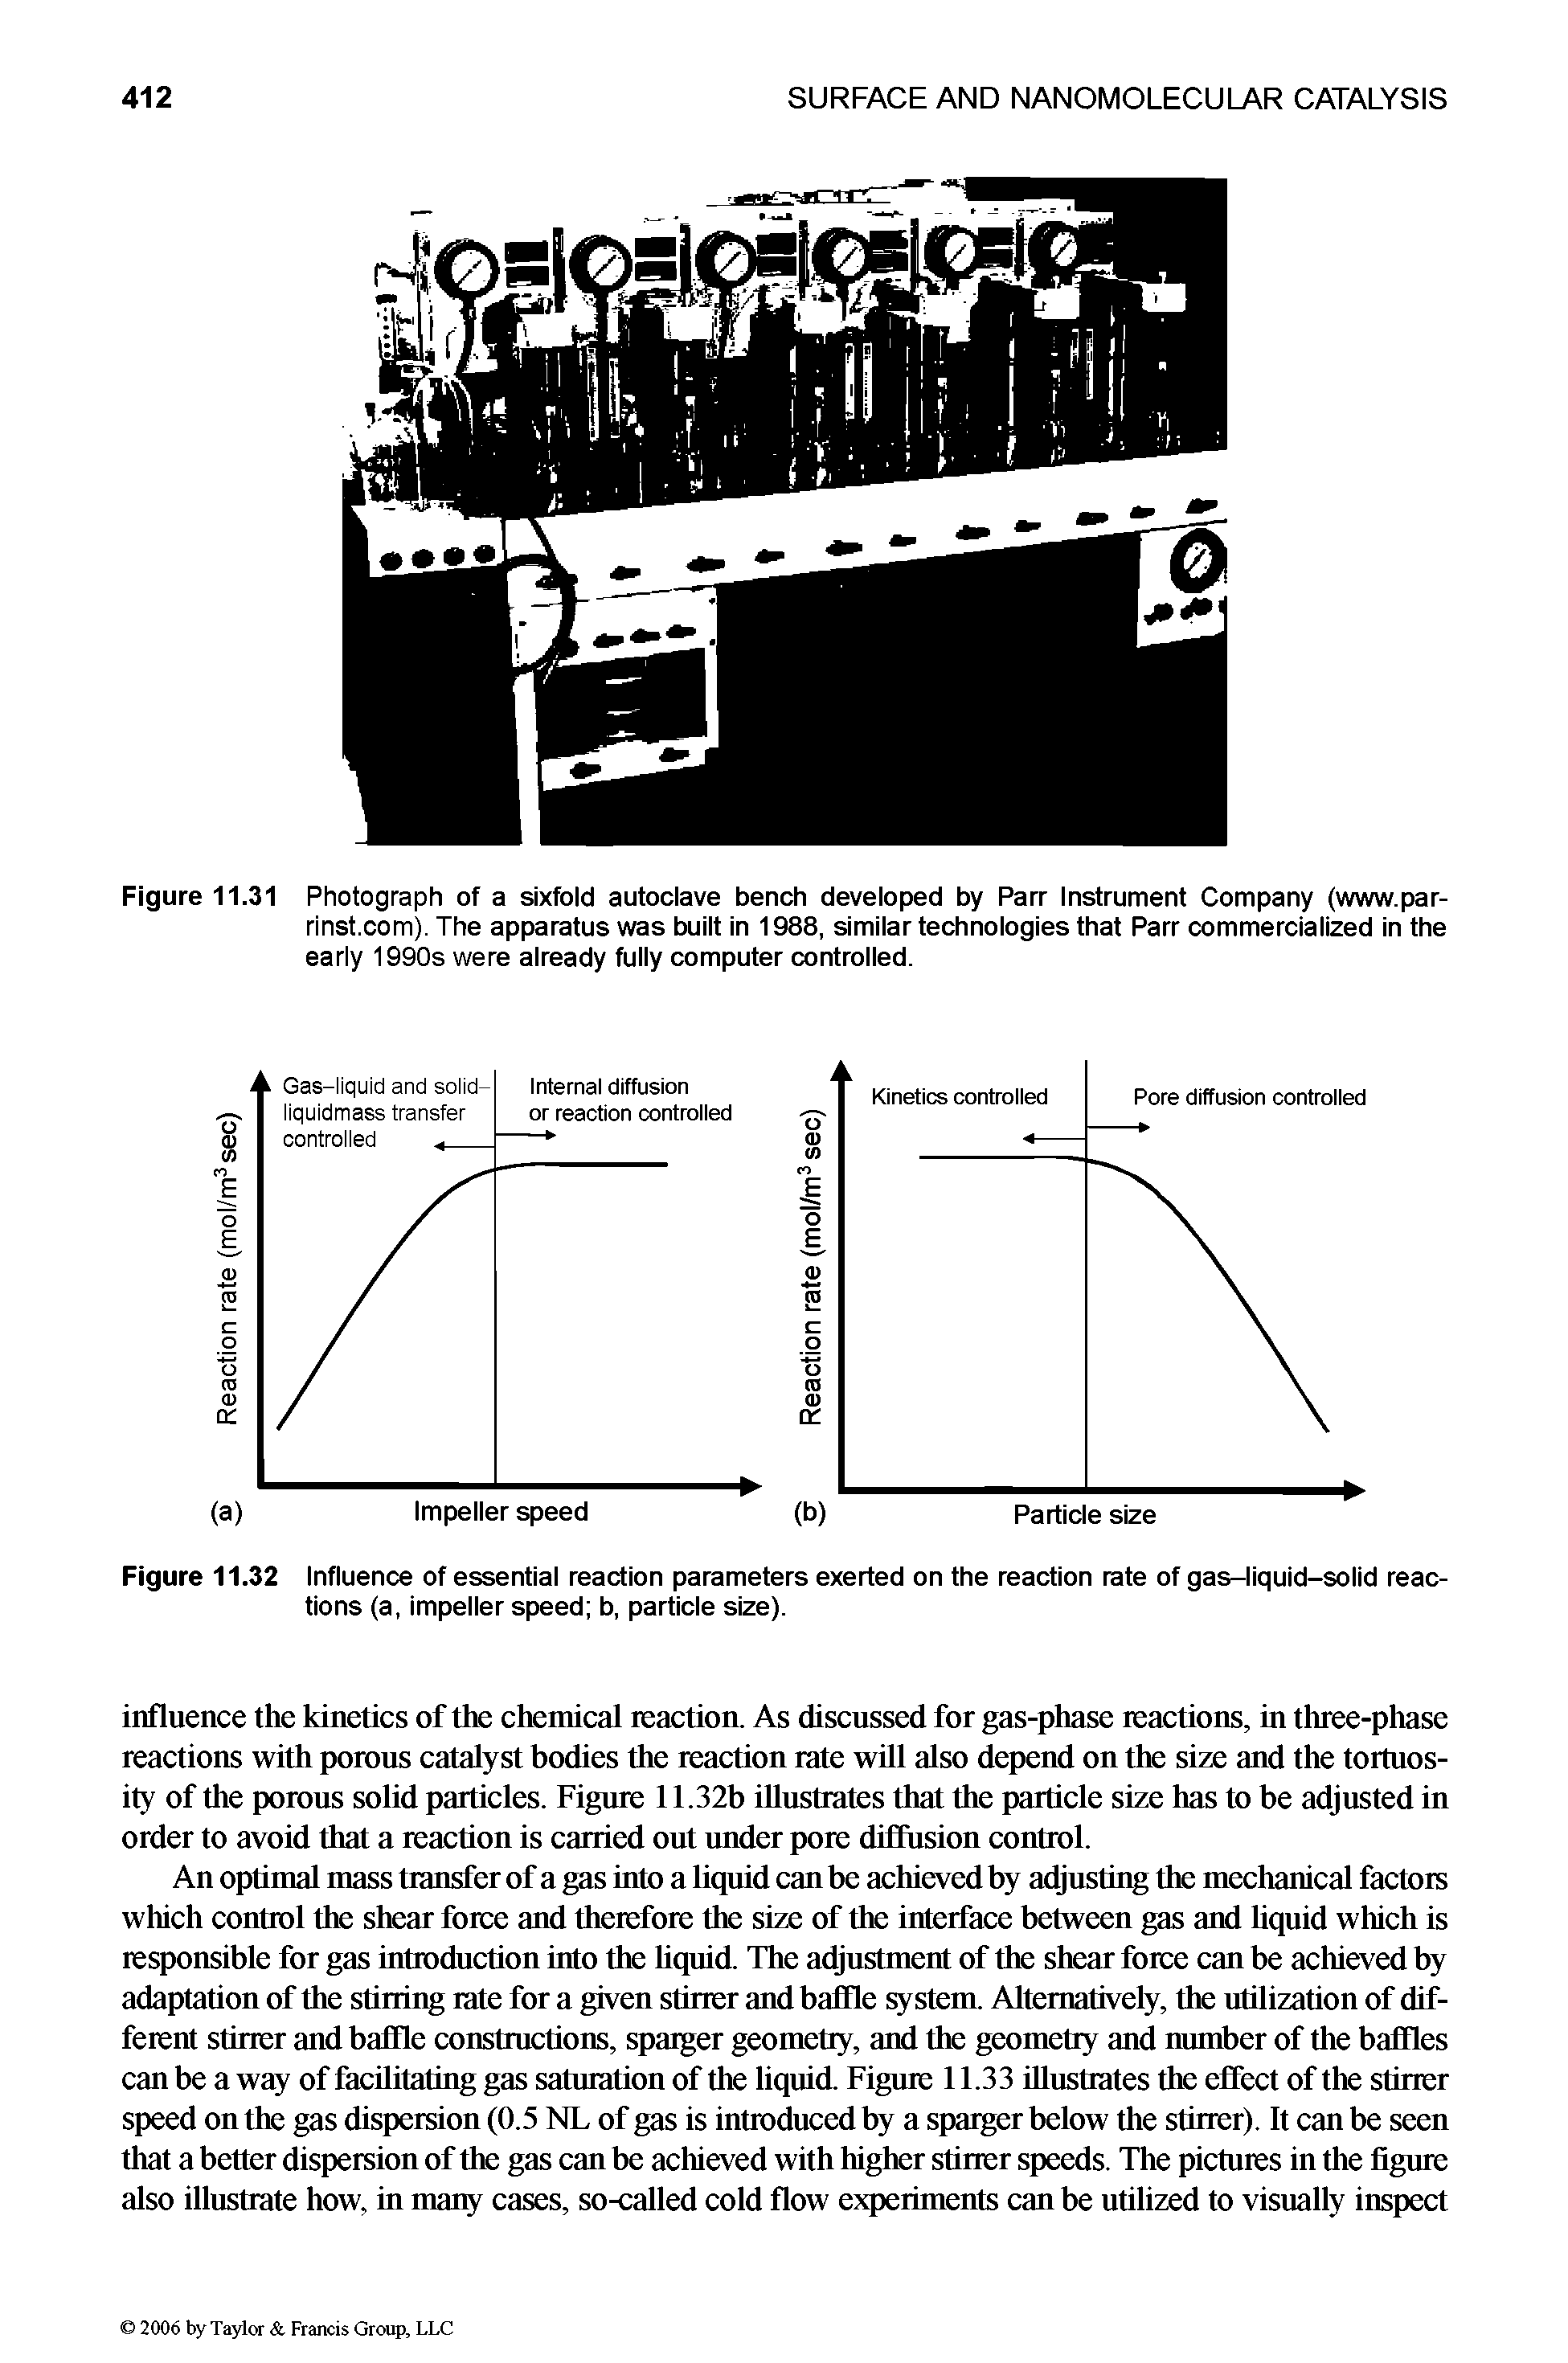 Figure 11.31 Photograph of a sixfold autoclave bench developed by Parr Instrument Company (www.par-rinst.com). The apparatus was built in 1988, similar technologies that Parr commercialized in the early 1990s were already fully computer controlled.